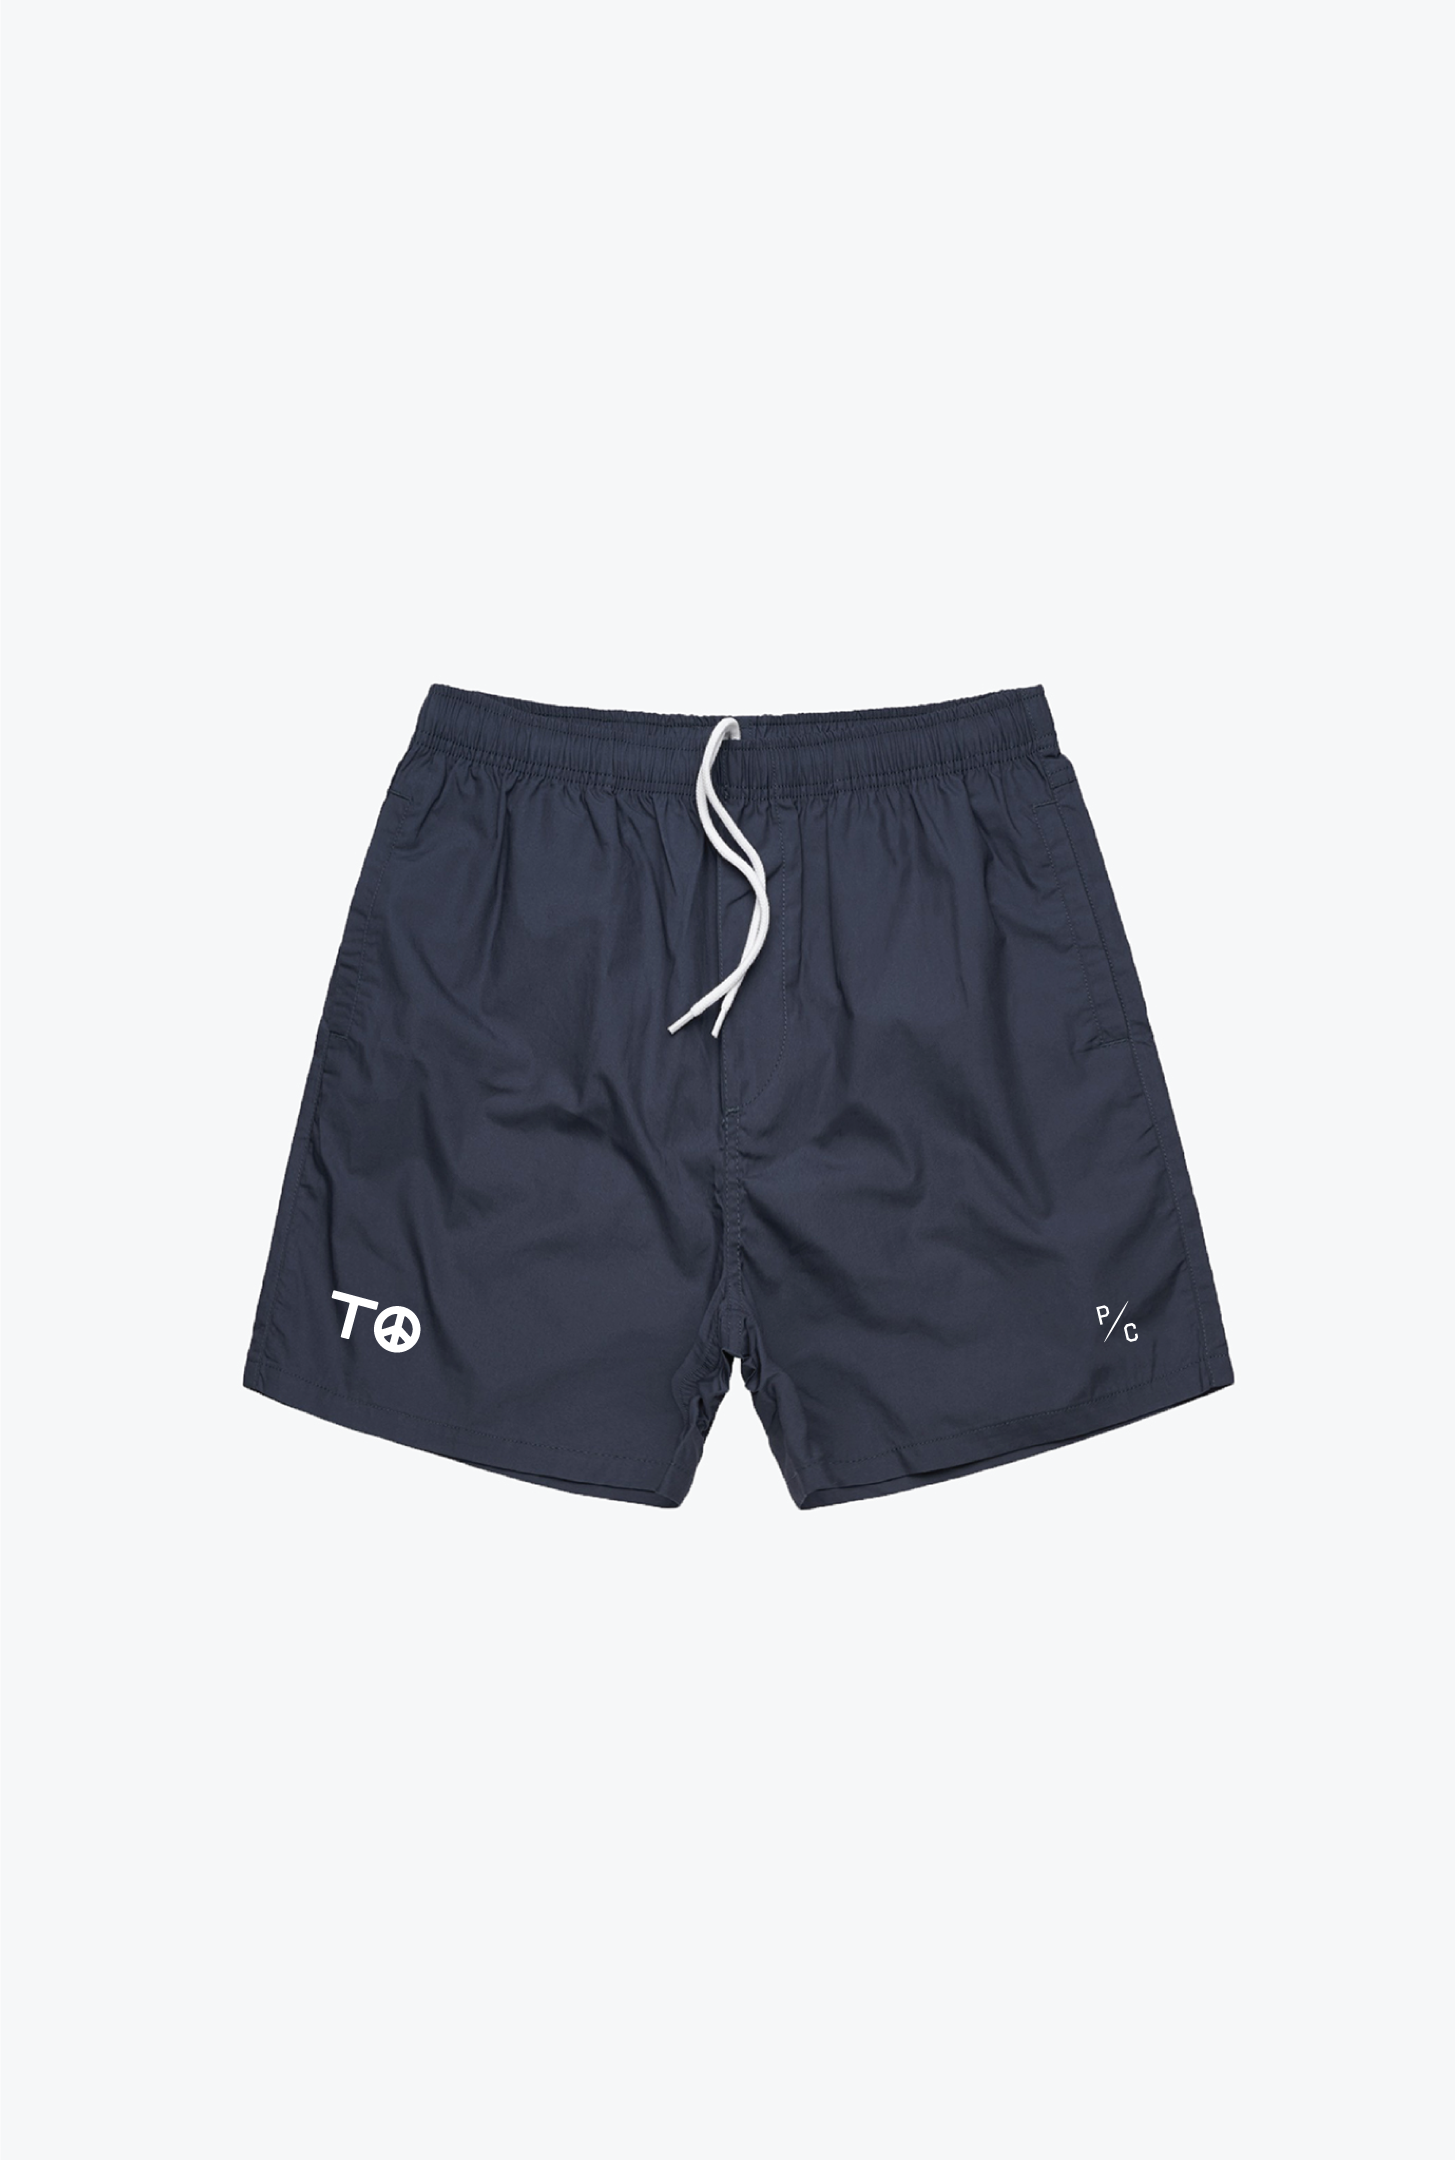 "TO" Peace Sign Board Shorts - Petrol Blue